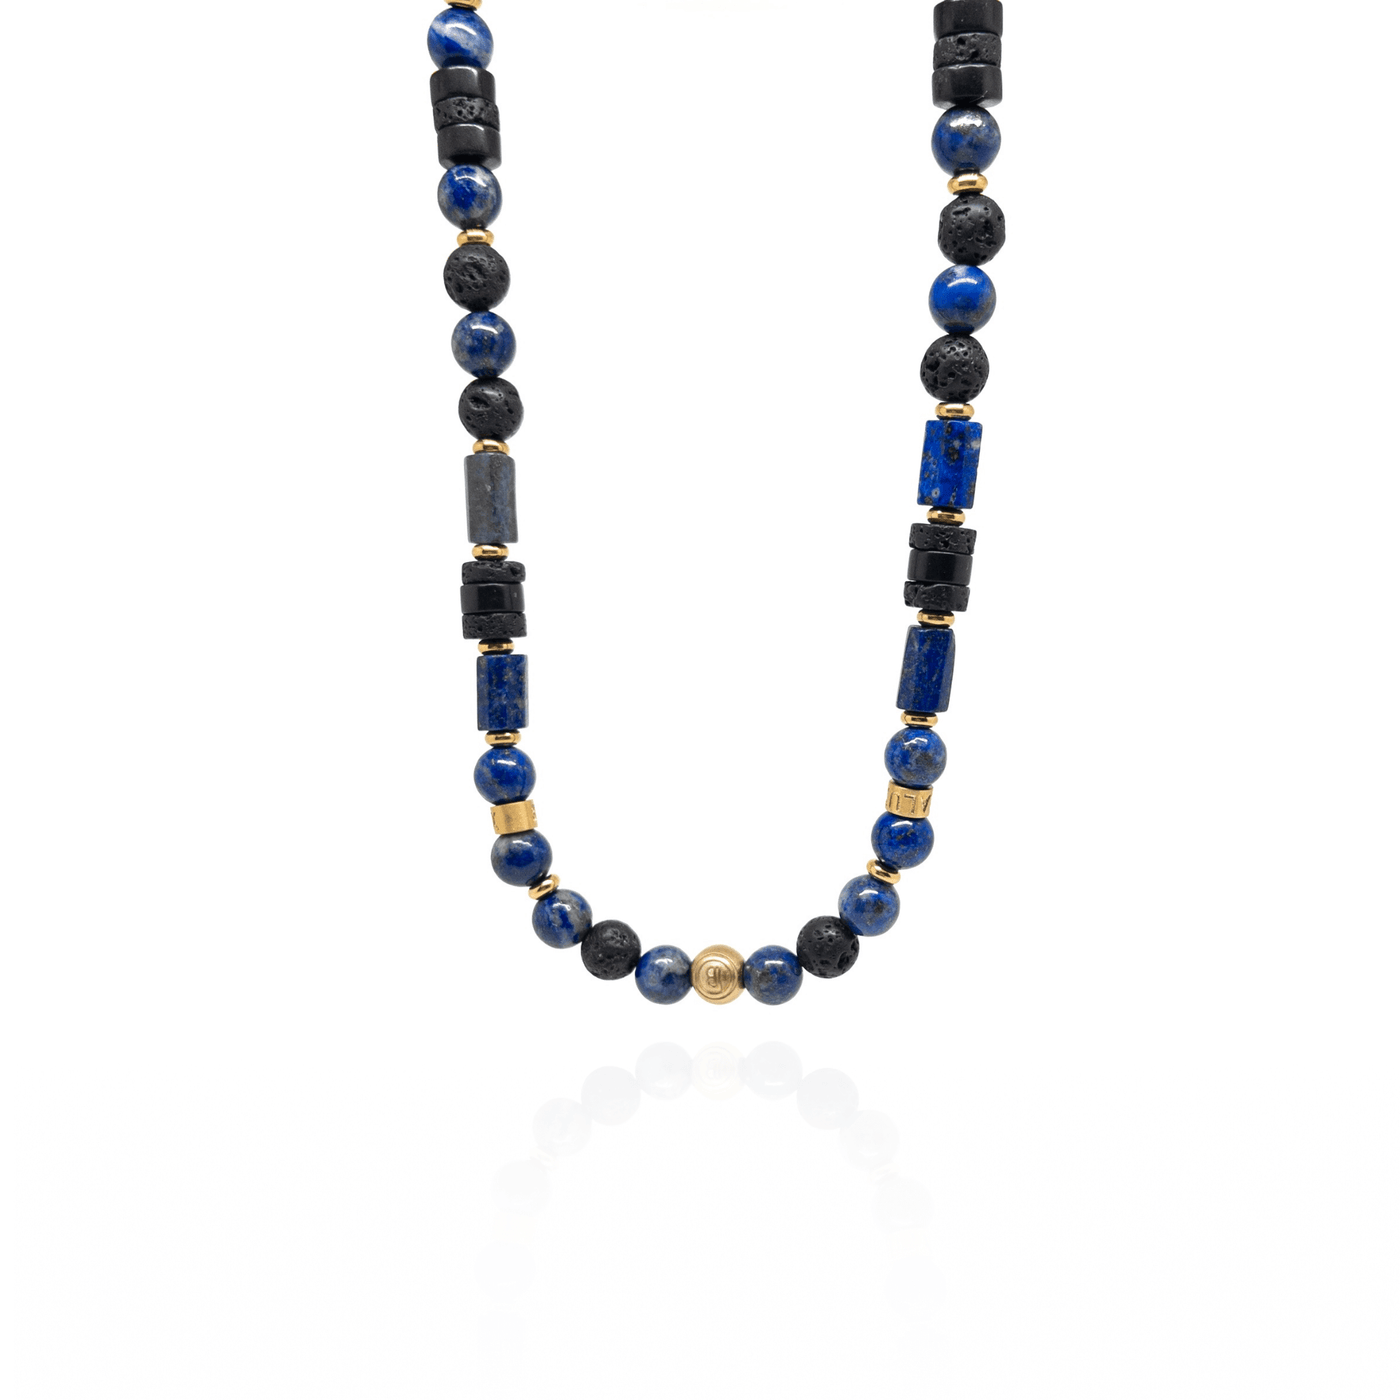 The Lapis Lazuli and Volcanic Stones Necklace